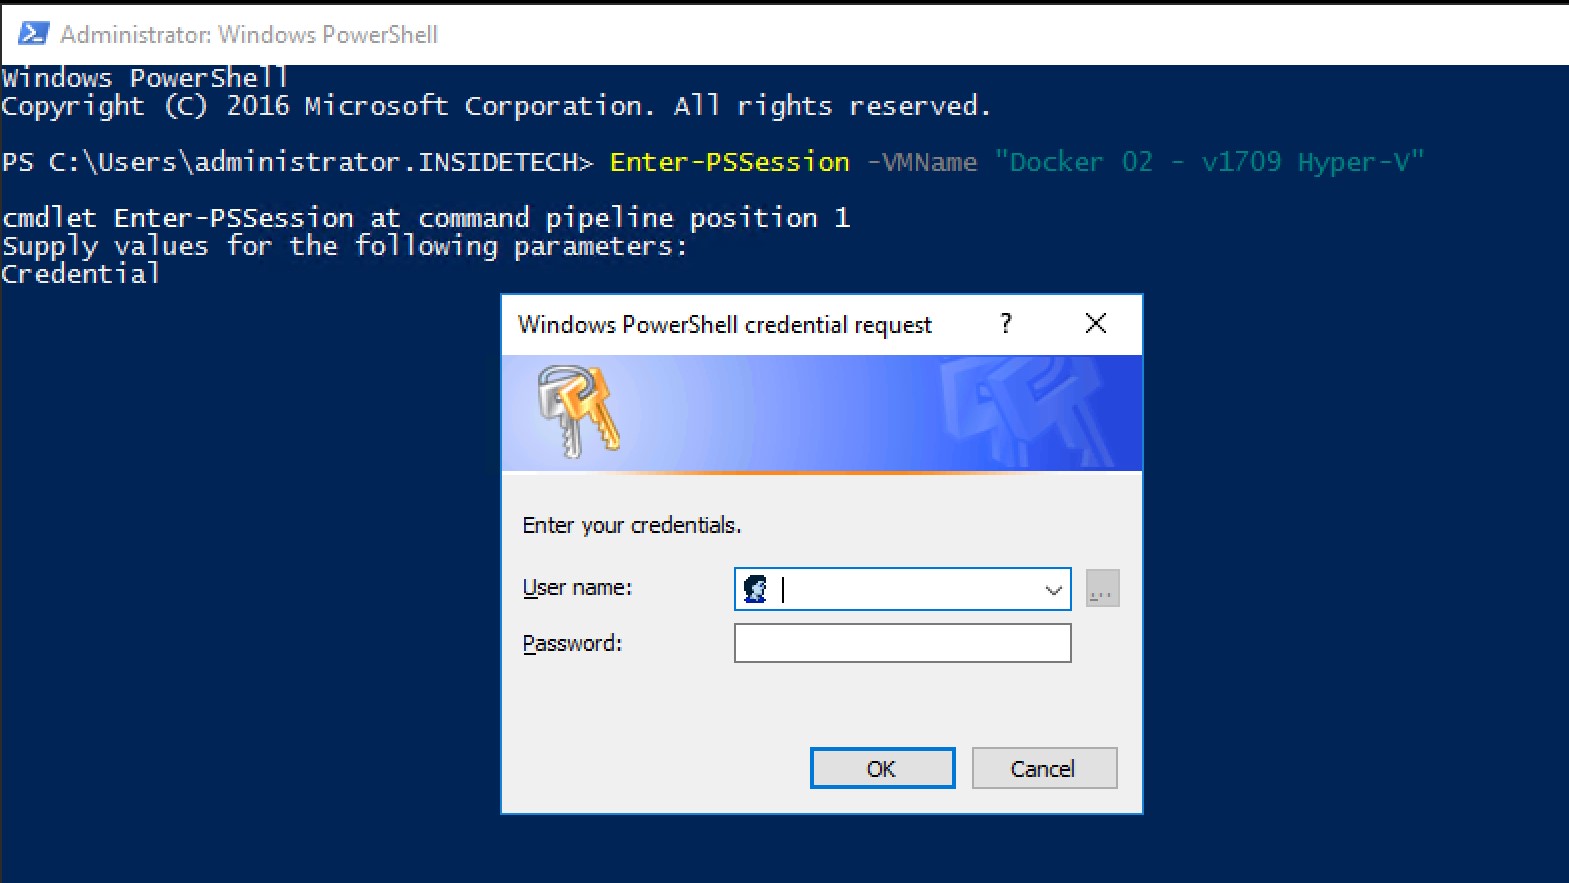 Use PowerShell Invoke-Command to run scripts on remote computers